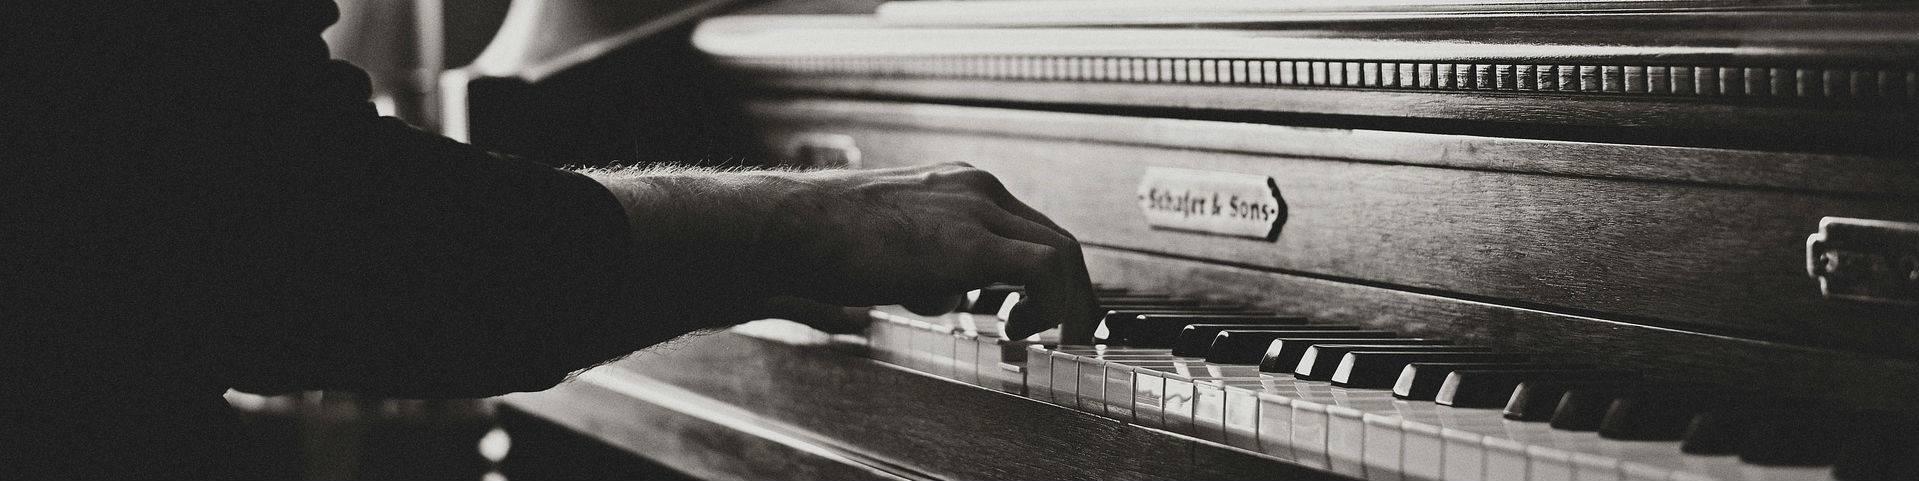 A black and white image of hands playing a piano